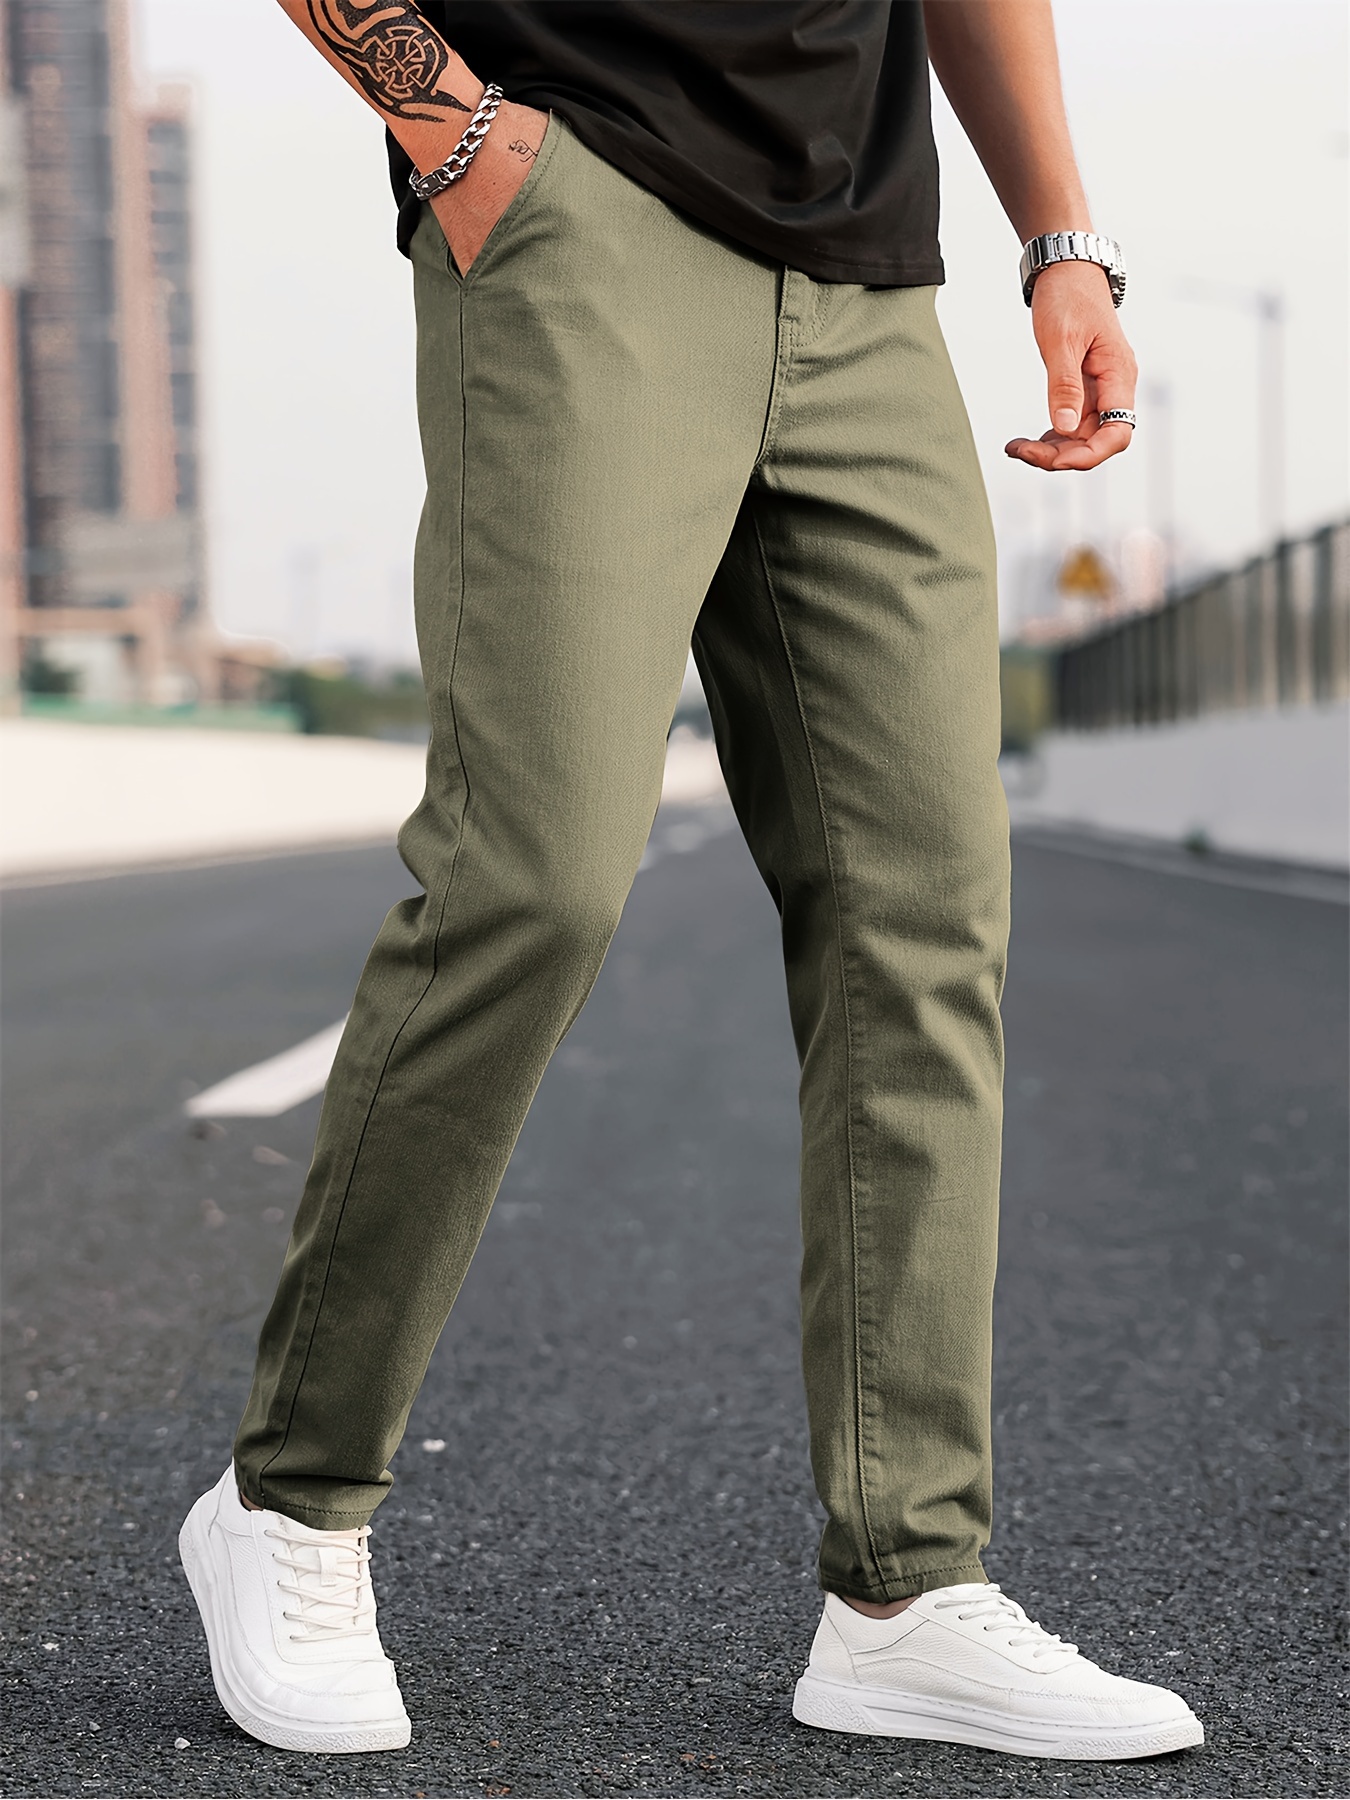 Stylish Men's Tapered Trousers - Comfortable Solid Color, Versatile Cropped Design, Perfect for Casual and Streetwear Occasions